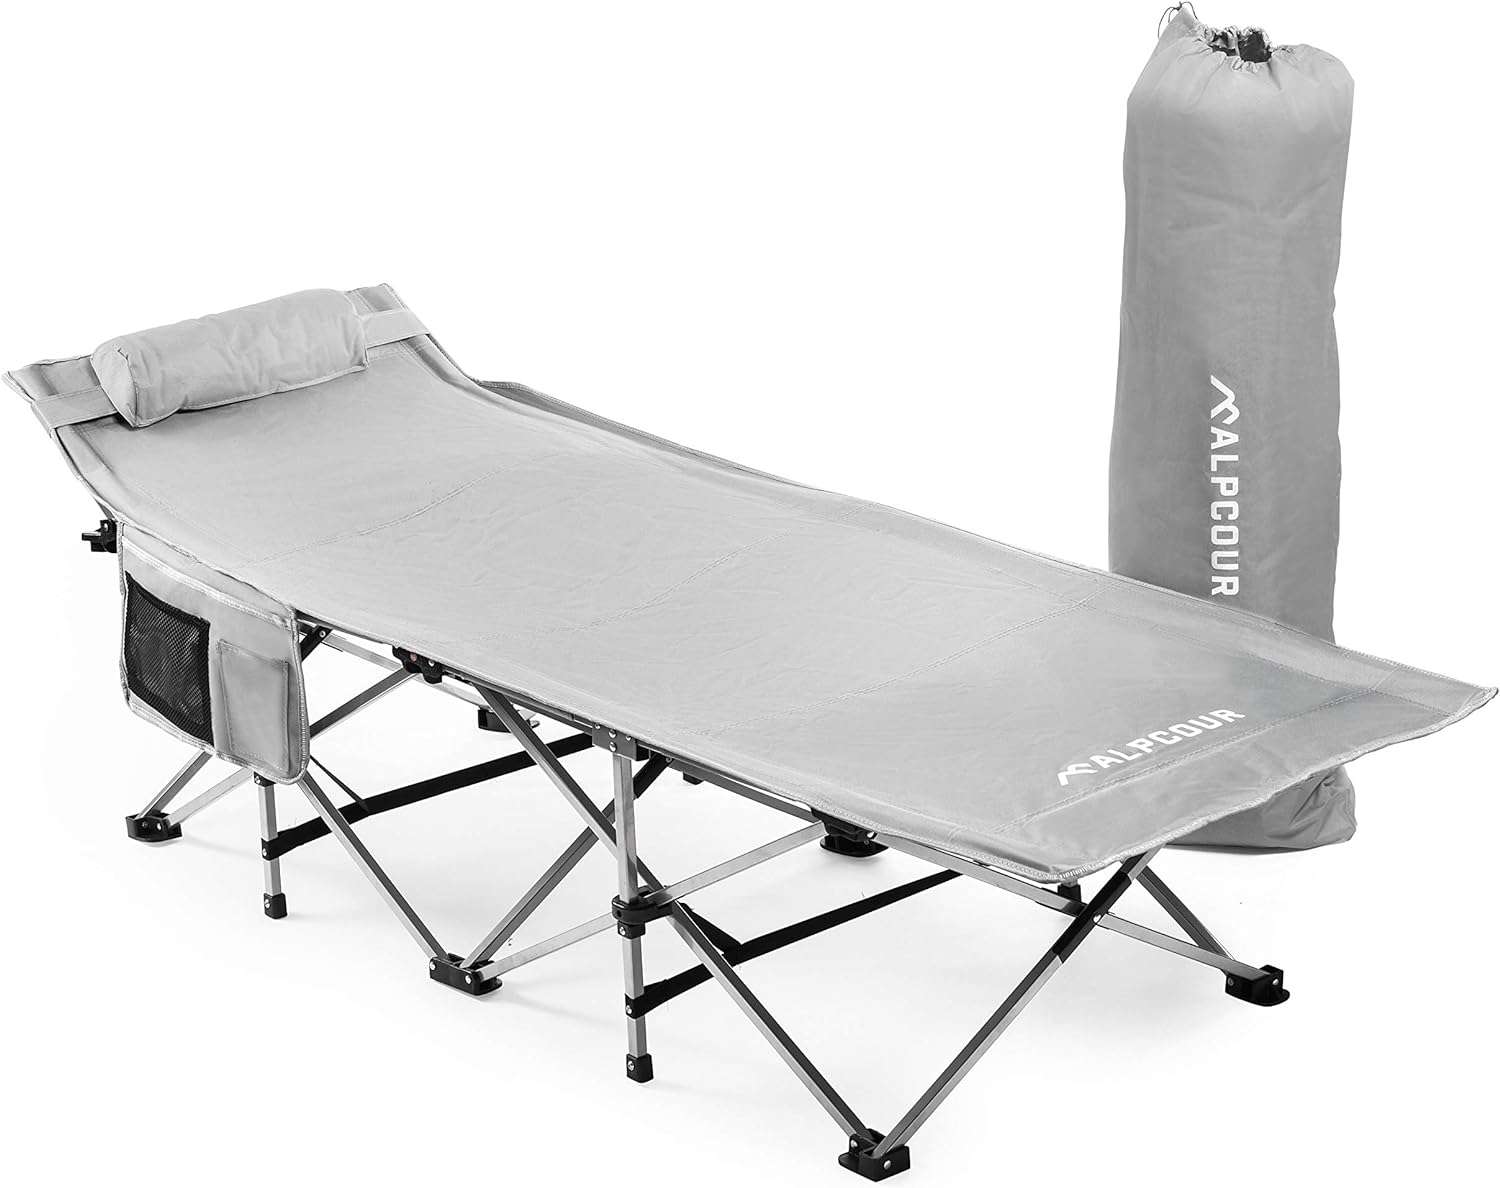 Alpcour XL Compact Folding Camping Bed - Steel Frame, Polyester, 500 Lbs Capacity